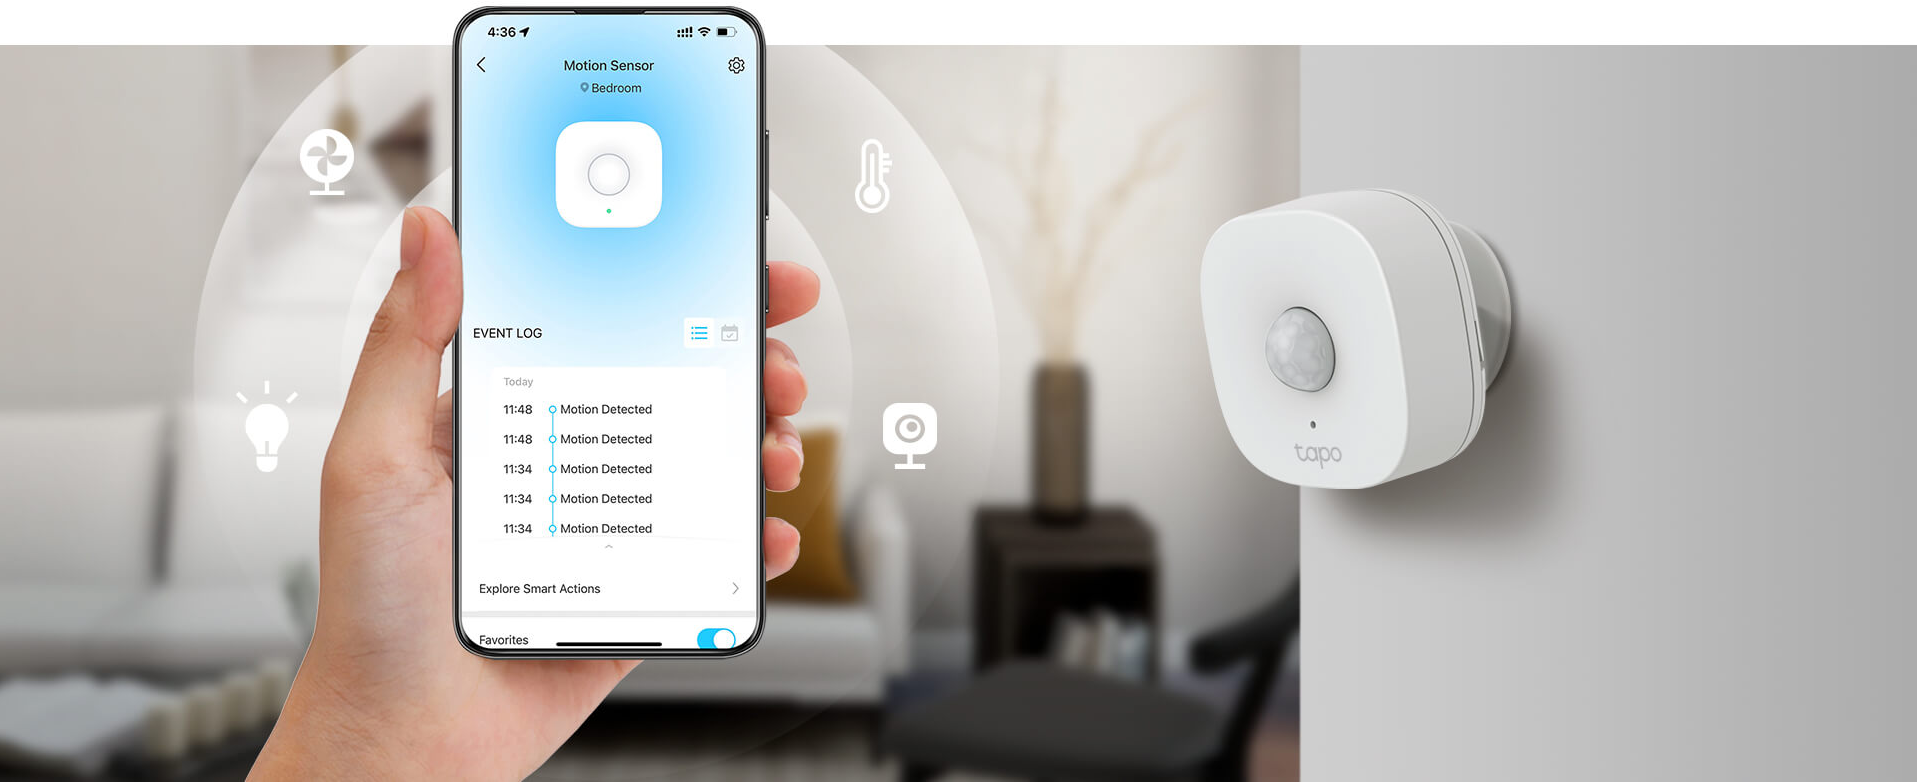 All in One App
Experience your next-level smart home with the Tapo line all in a single app. Create a more secure, convenient, and comfortable living space for you and your loved ones.